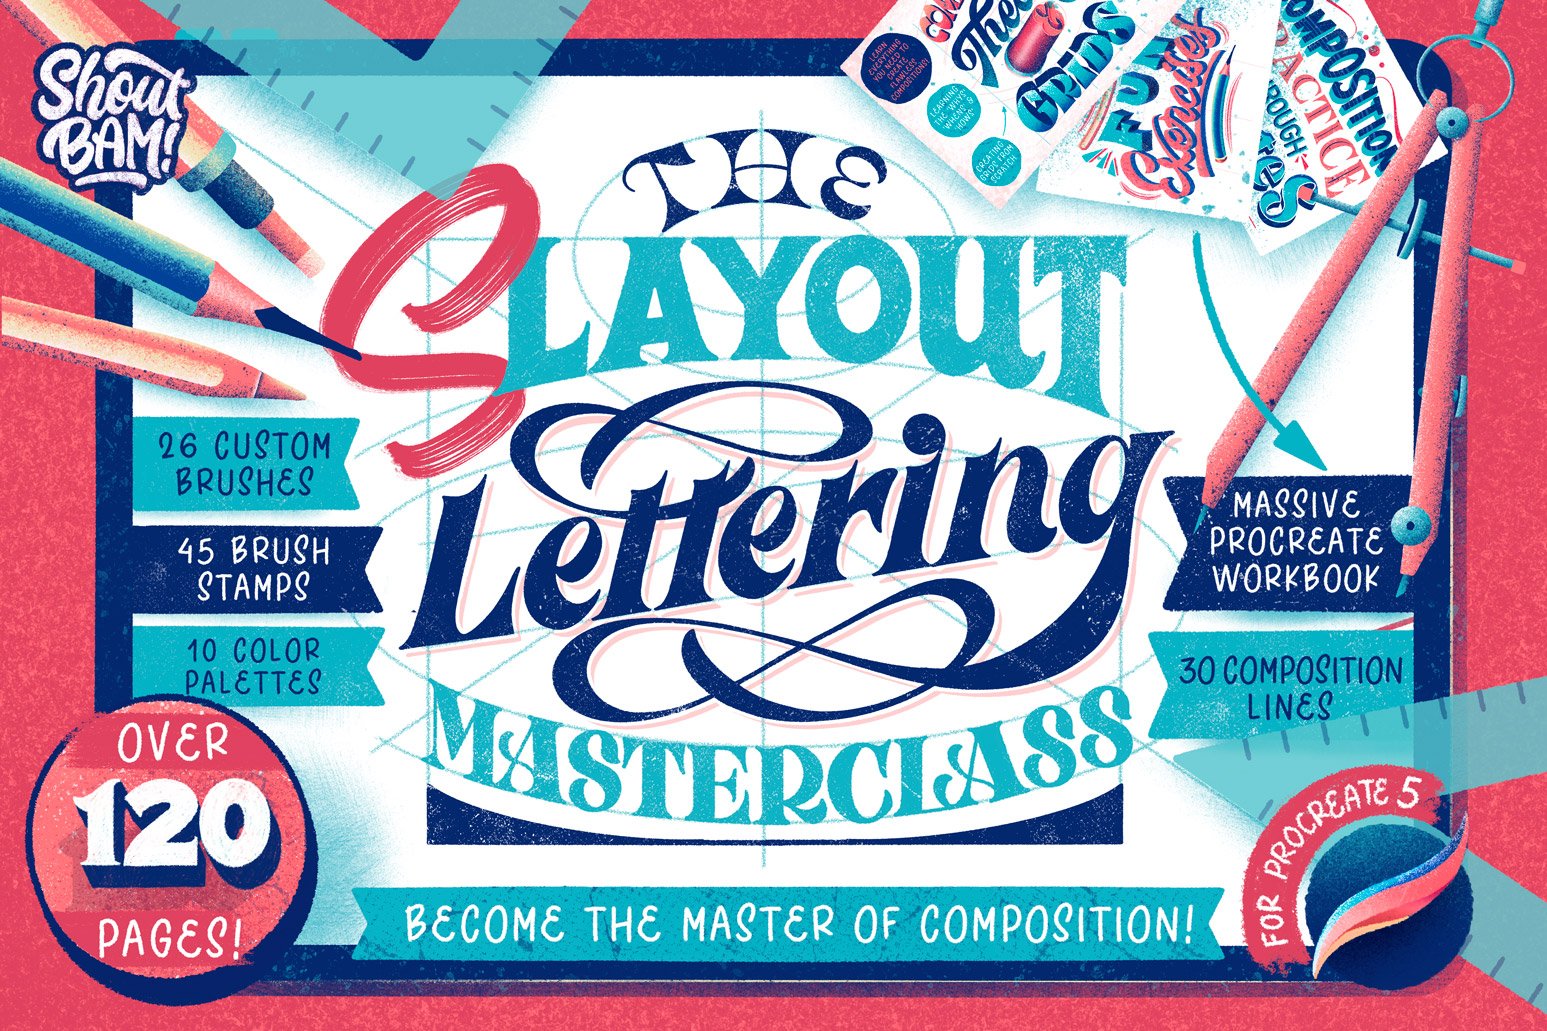 The Slayout Lettering Masterclass